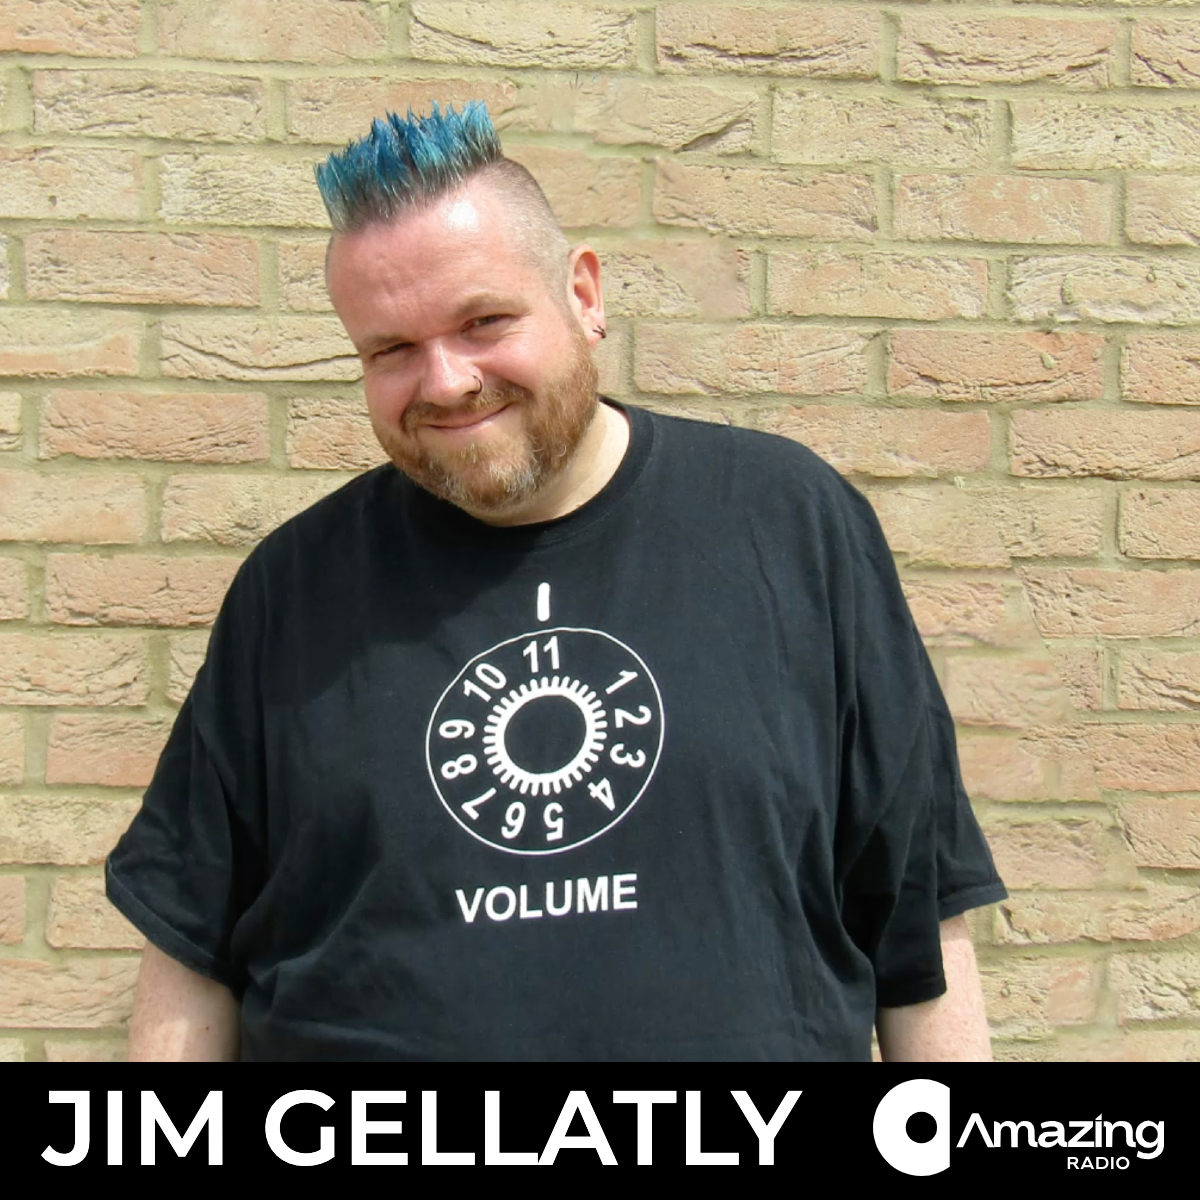 Loads of new music up next with @JimGellatly playing tracks from @aboutbunnyband @annasecretpoet @BIGSPECIAL_ @BlackLesion @calumbowiemusic @CarrieMacMusic @c_cavalry @echomach @grlsspkfrnch @japan_review @lomoon @Man__of__Moon @andthemondays @Meznaproject @Mid_nite_life & more!